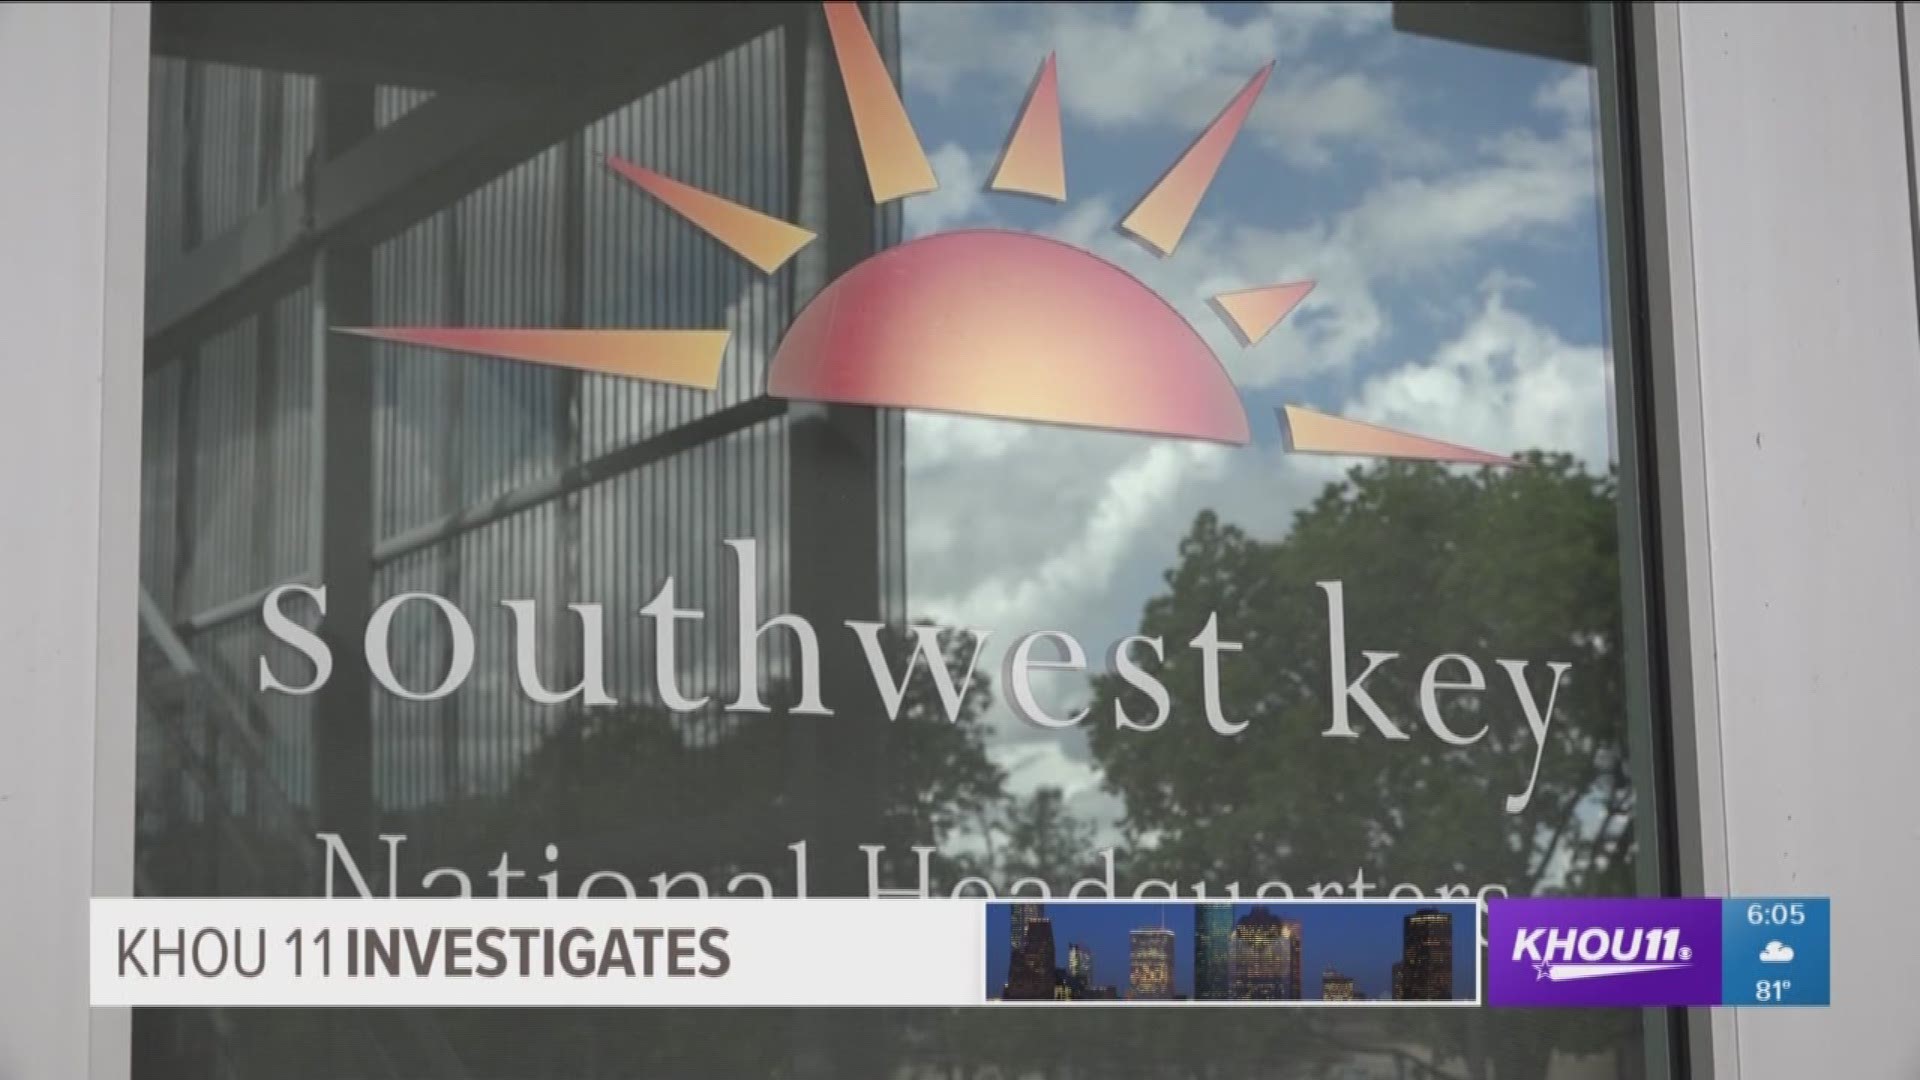 KHOU 11 Investigates found the nonprofit organization trying to open a migrant detention center in Houston has a history of health and safety violations. 